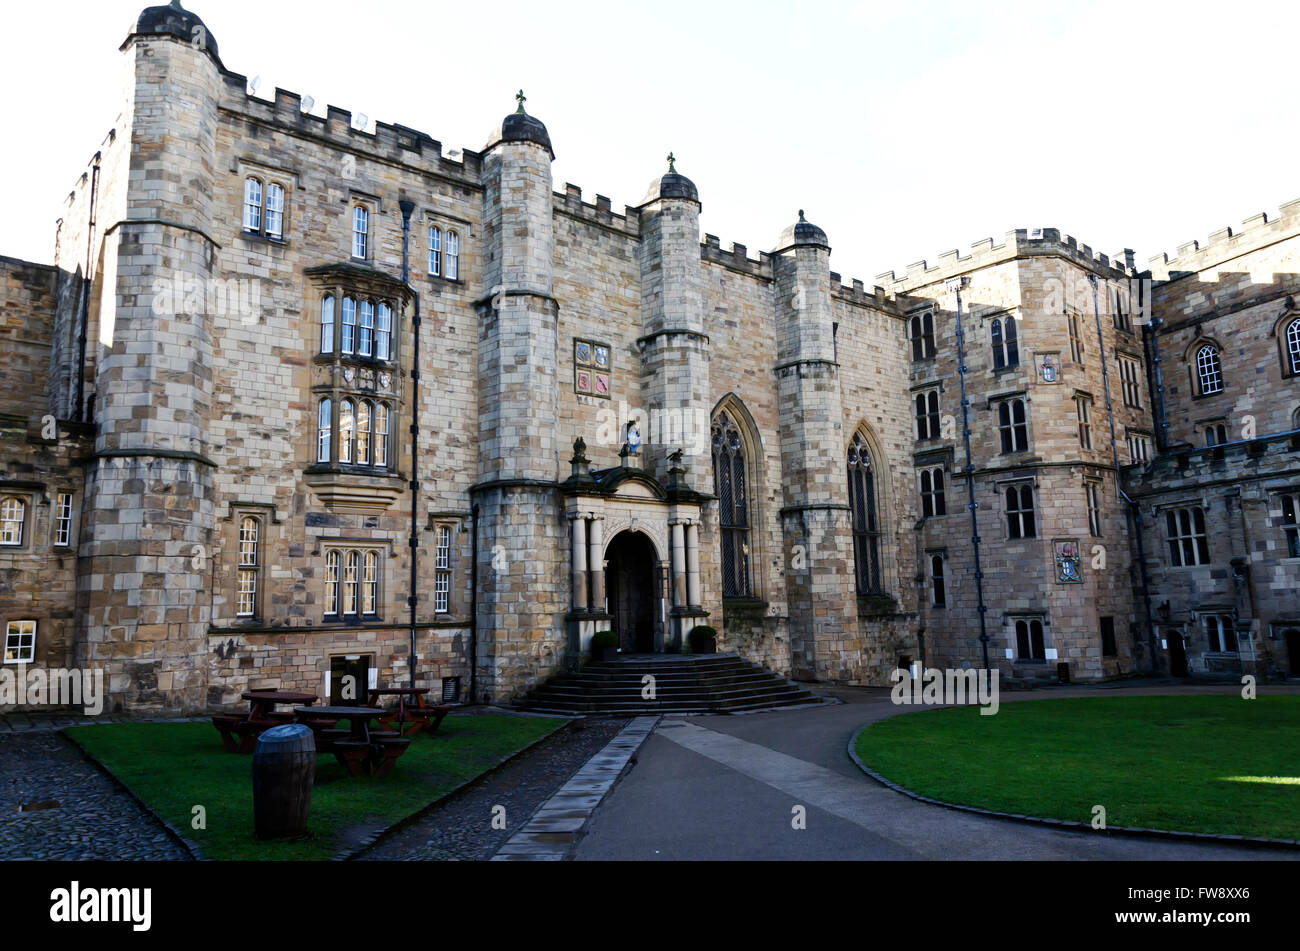 Durham Castle, part of University College Durham, Tyne and Wear district in the north east of England. Stock Photo